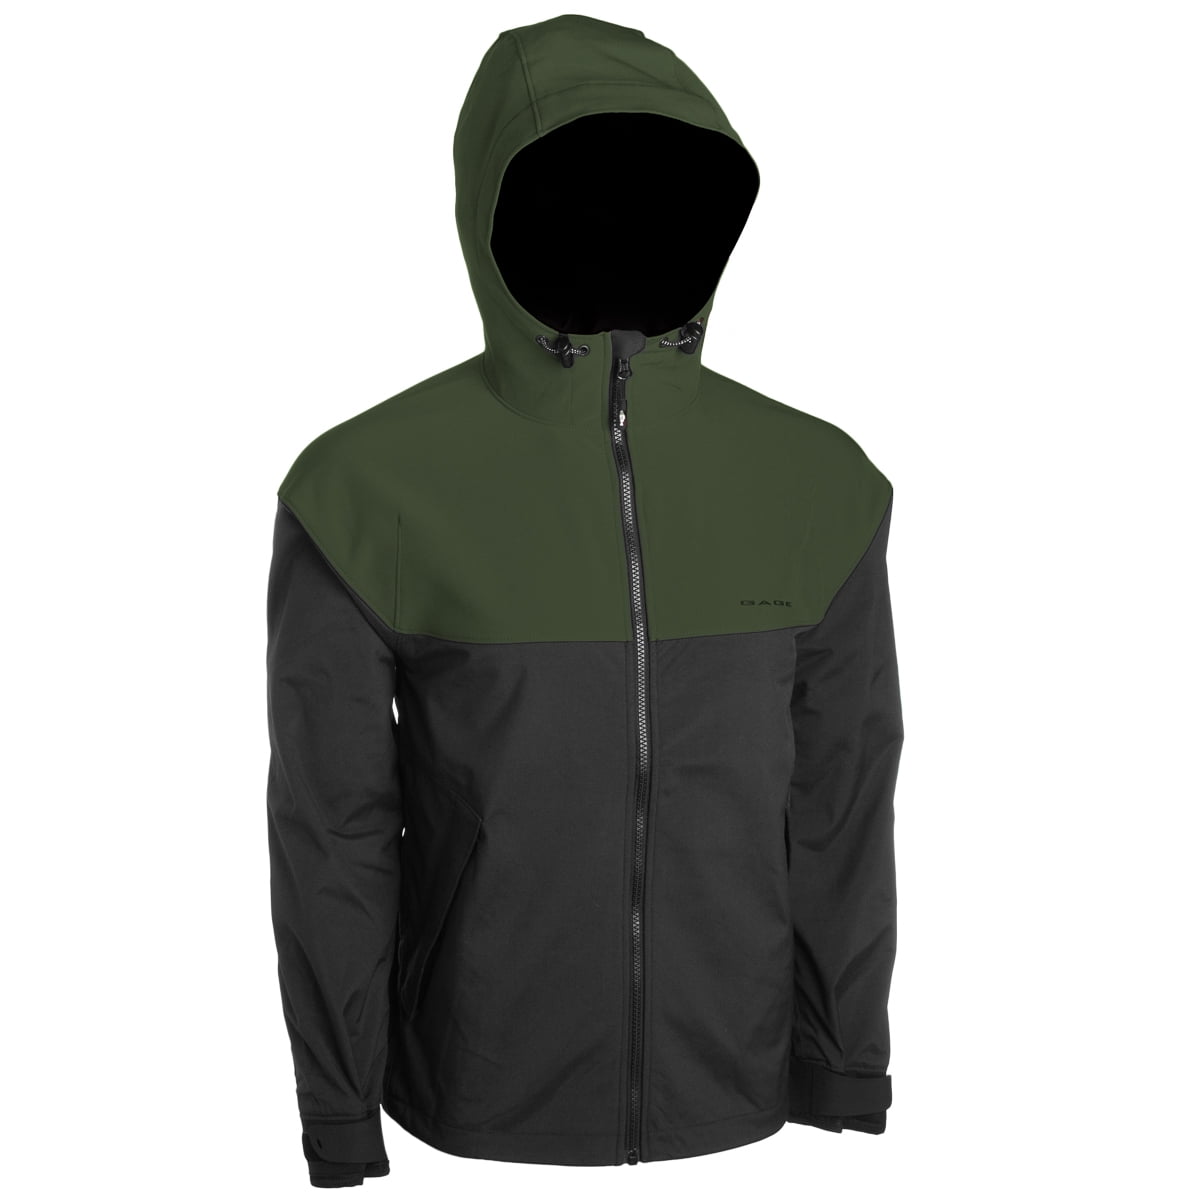 Details about   Grundens Water-Resistant Softshell Jacket Fishing Gear Fishing Jacket Outdoor 